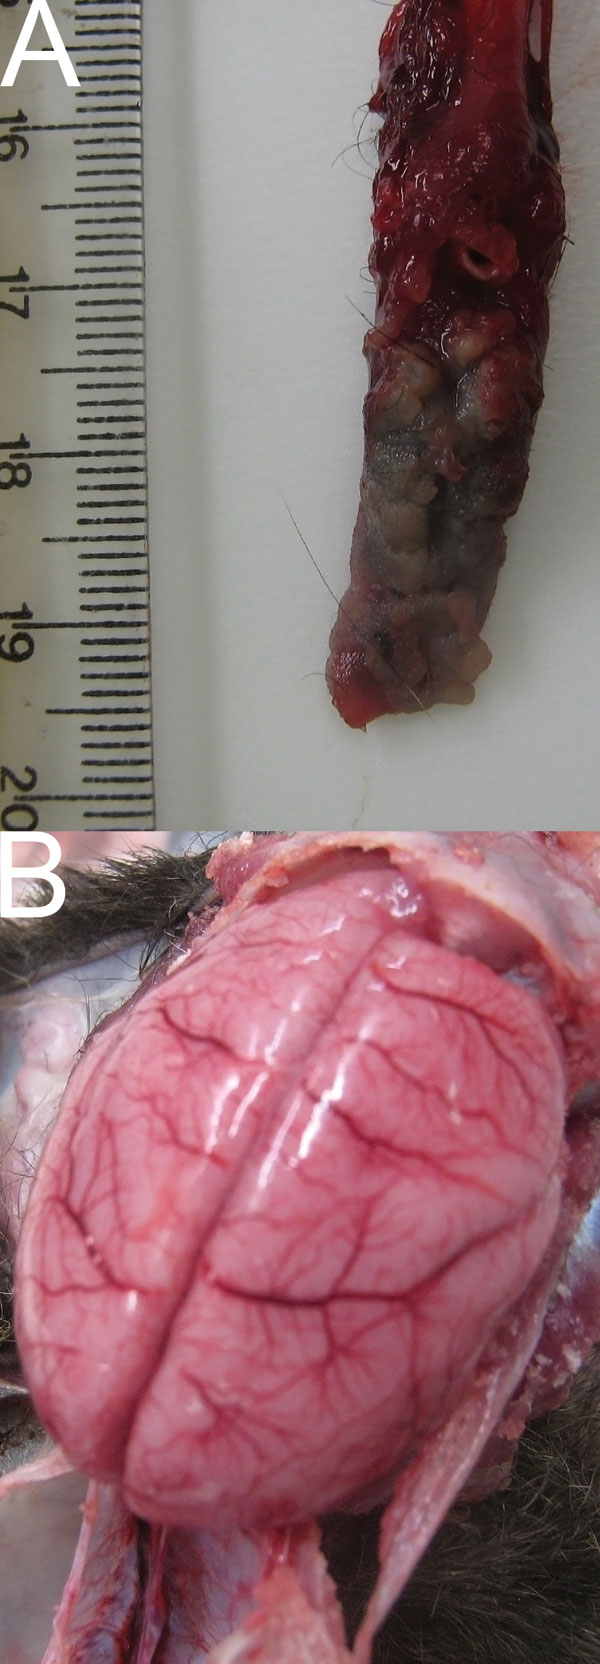 Gross lesions caused by human herpesvirus 1 infection in marmosets. A) Vesicular and necrotic plaques in tongue. B) Marked brain congestion. Scale shown in centimeters.